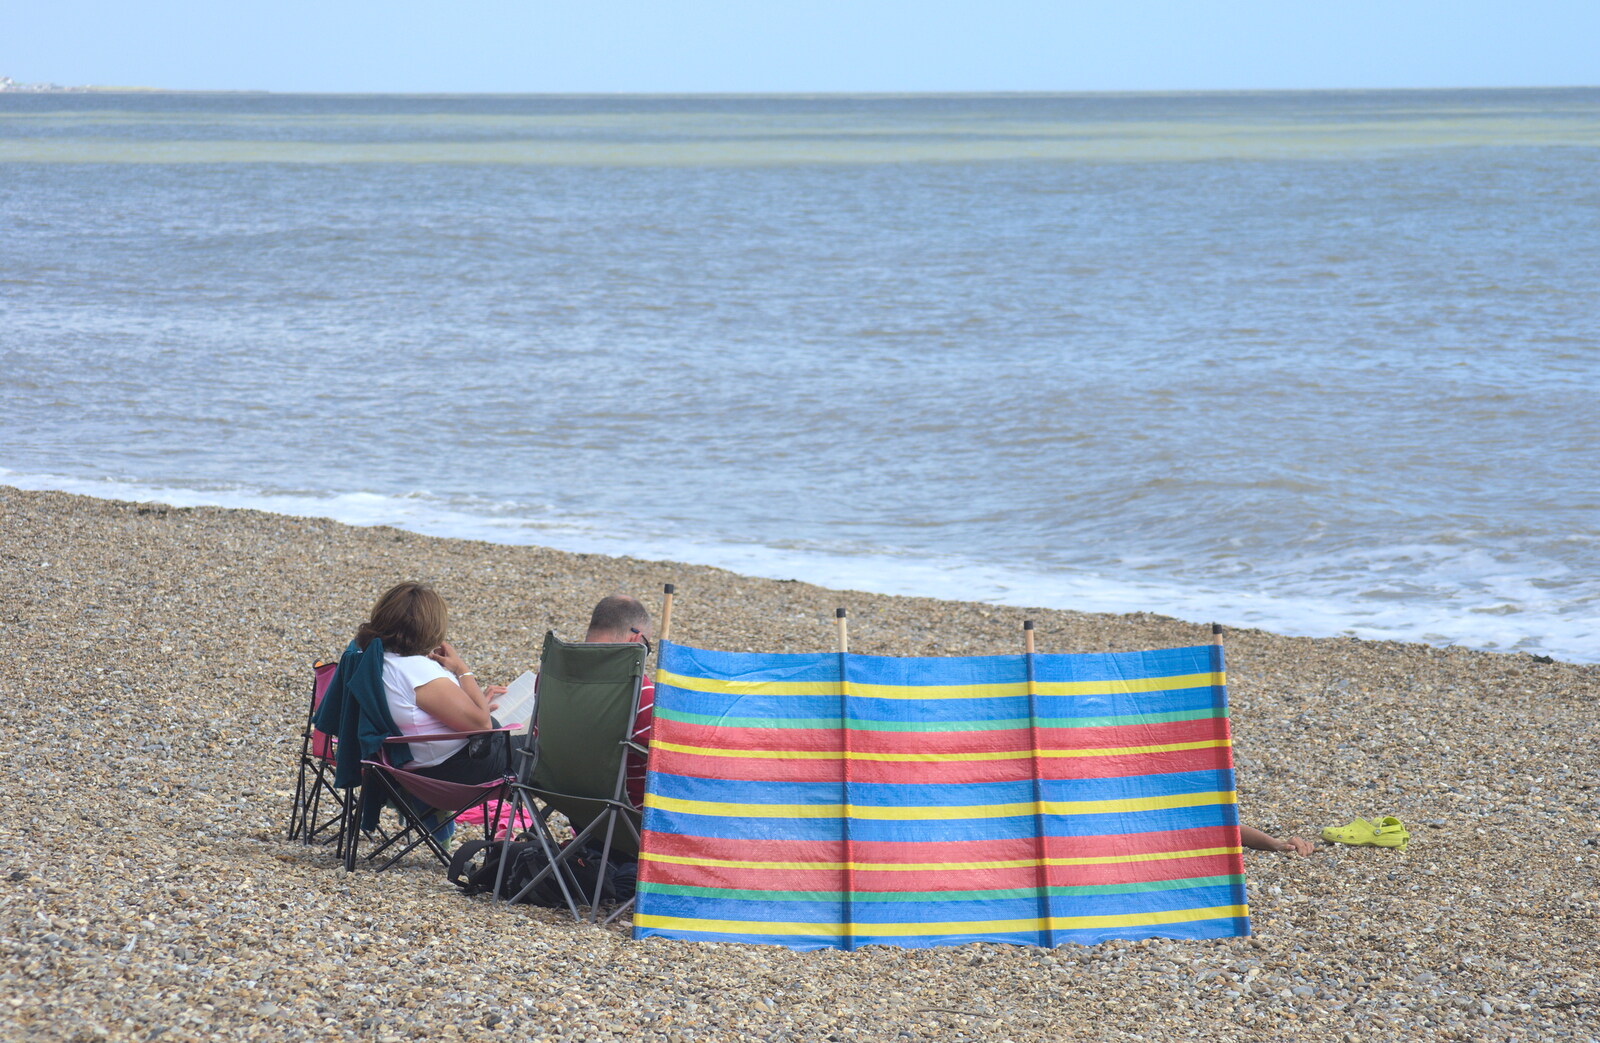 Another windbreak family from Camping by the Seaside, Cliff House, Dunwich, Suffolk - 15th August 2012